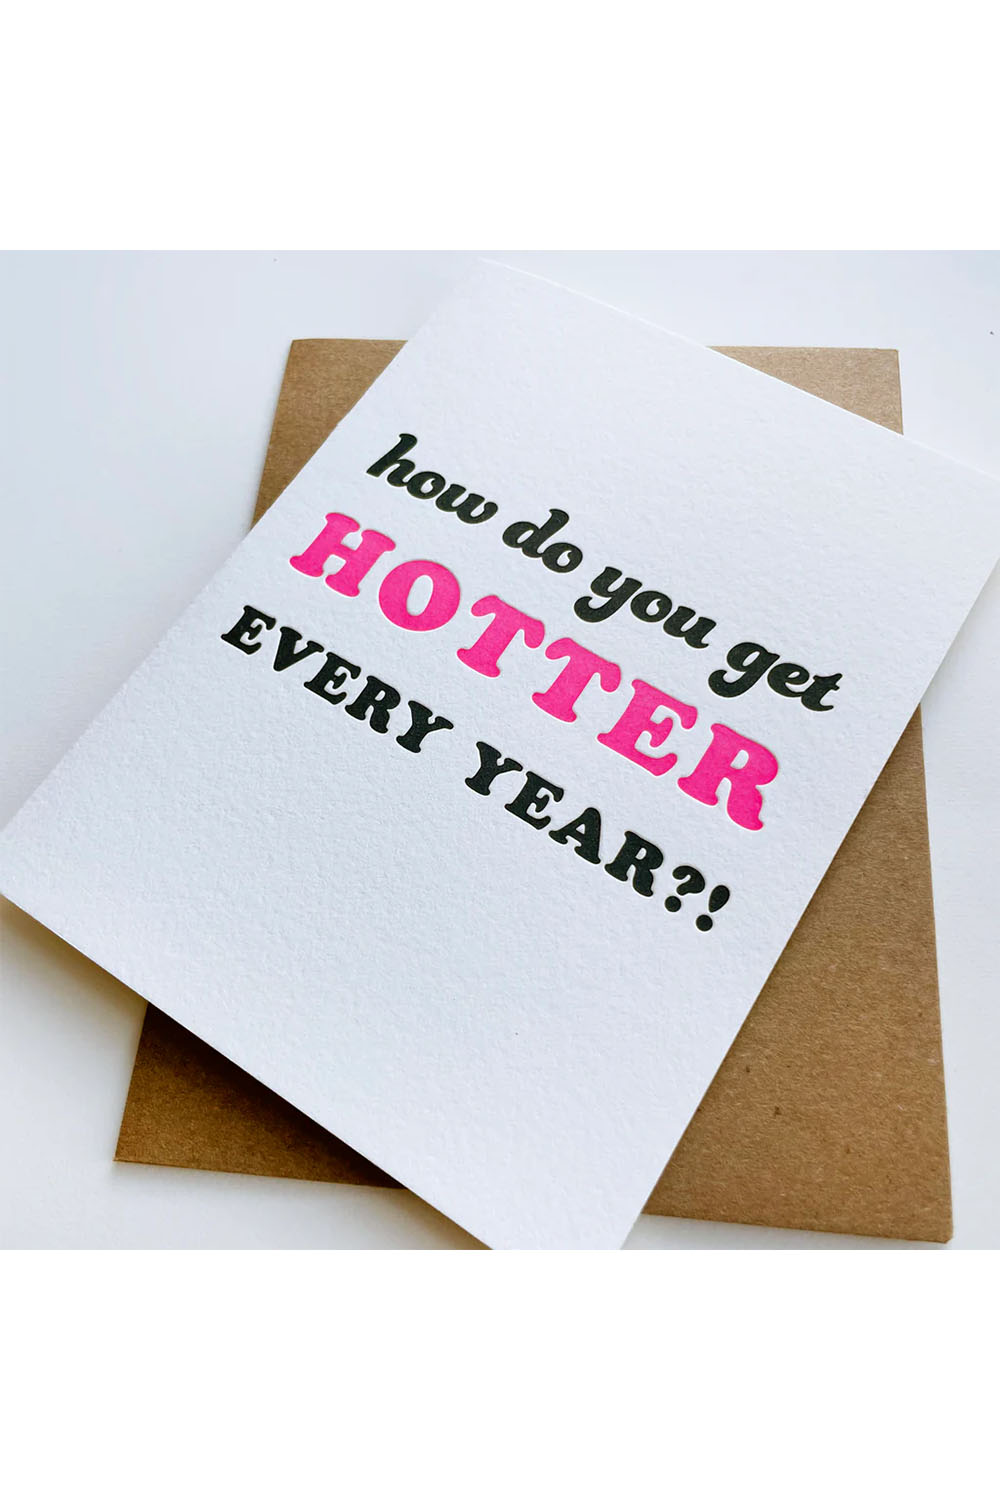 Steel Petal Press - Hotter Every Year Card